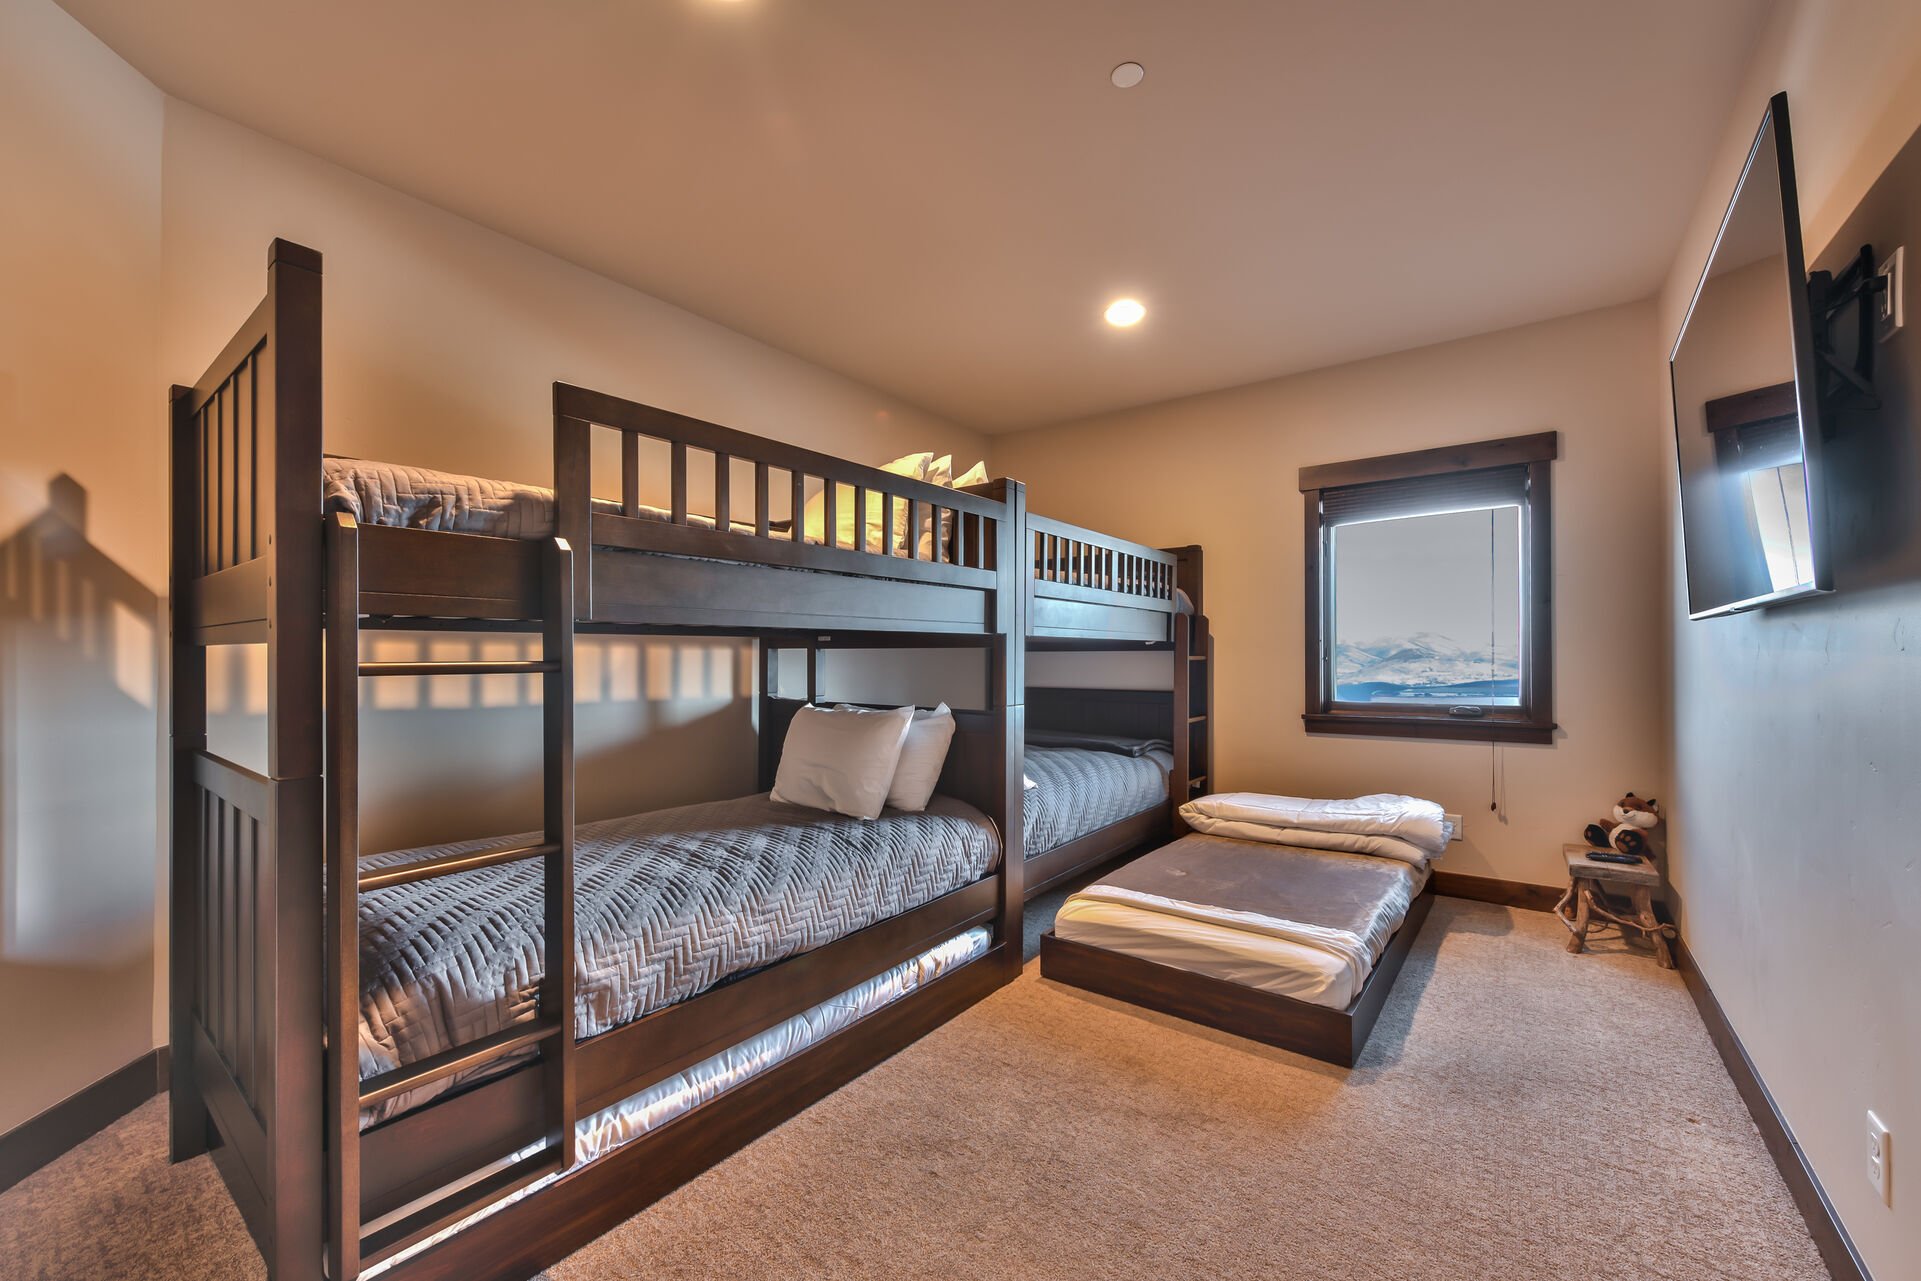 Bedroom 5 - Bunk Room with Full over Full Bunk Beds, Twin over Twin Bunk Beds, Two Twin Trundles, 60